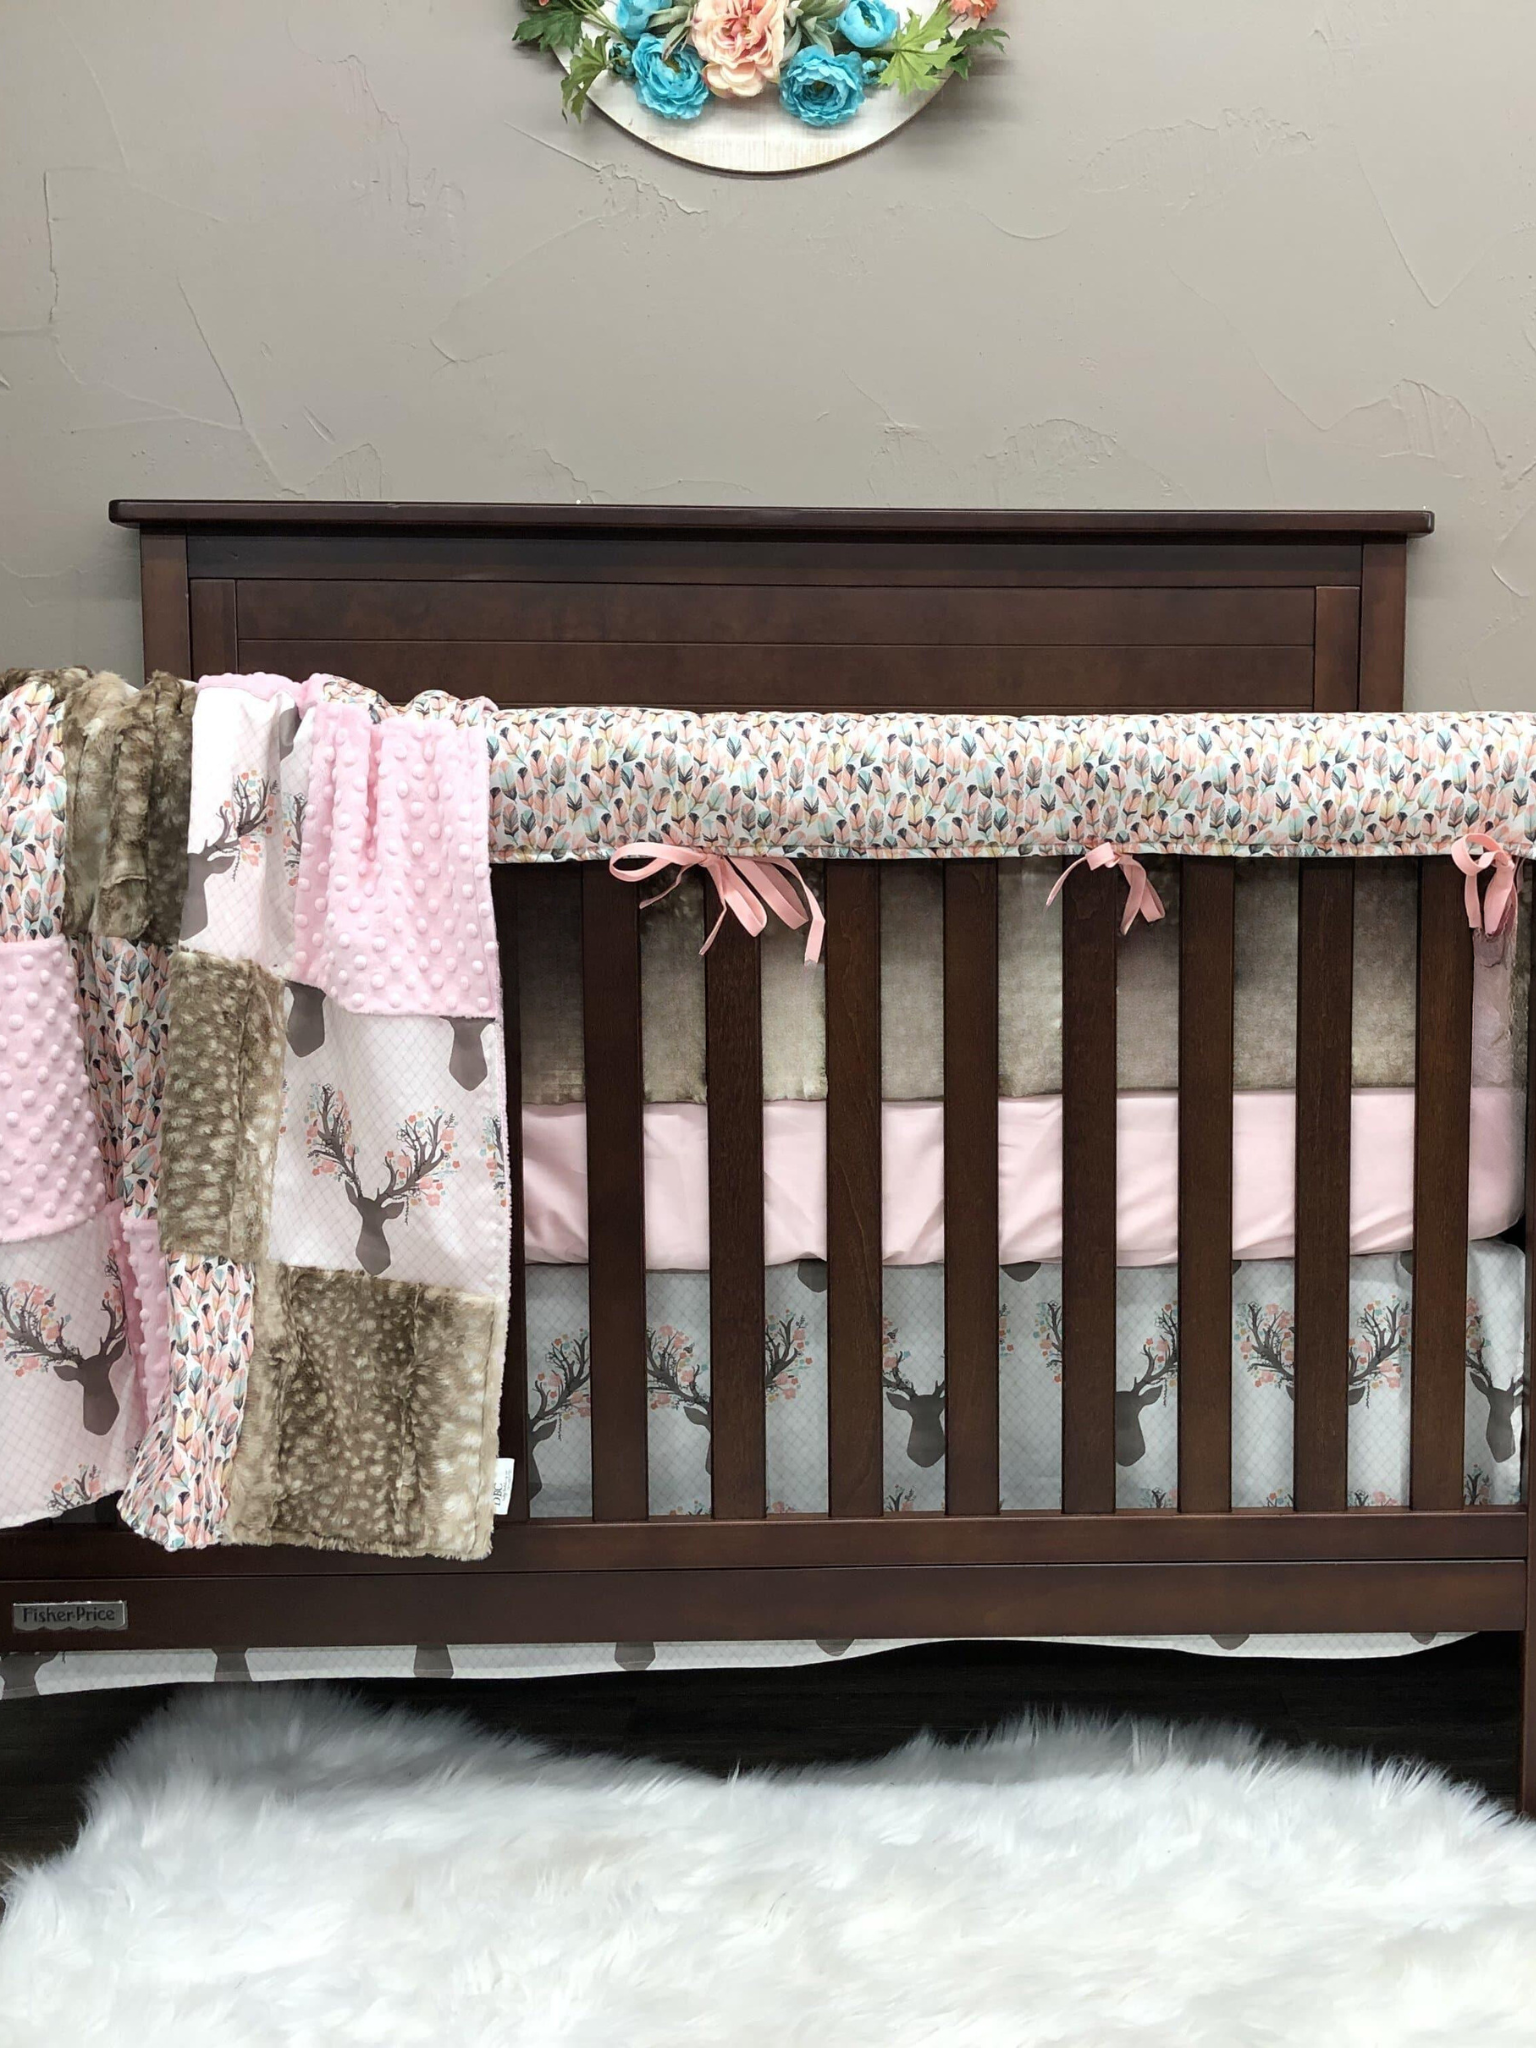 New Release Girl Crib Bedding - Tulip Fawn and Feather Woodland Baby Bedding Collection - DBC Baby Bedding Co 